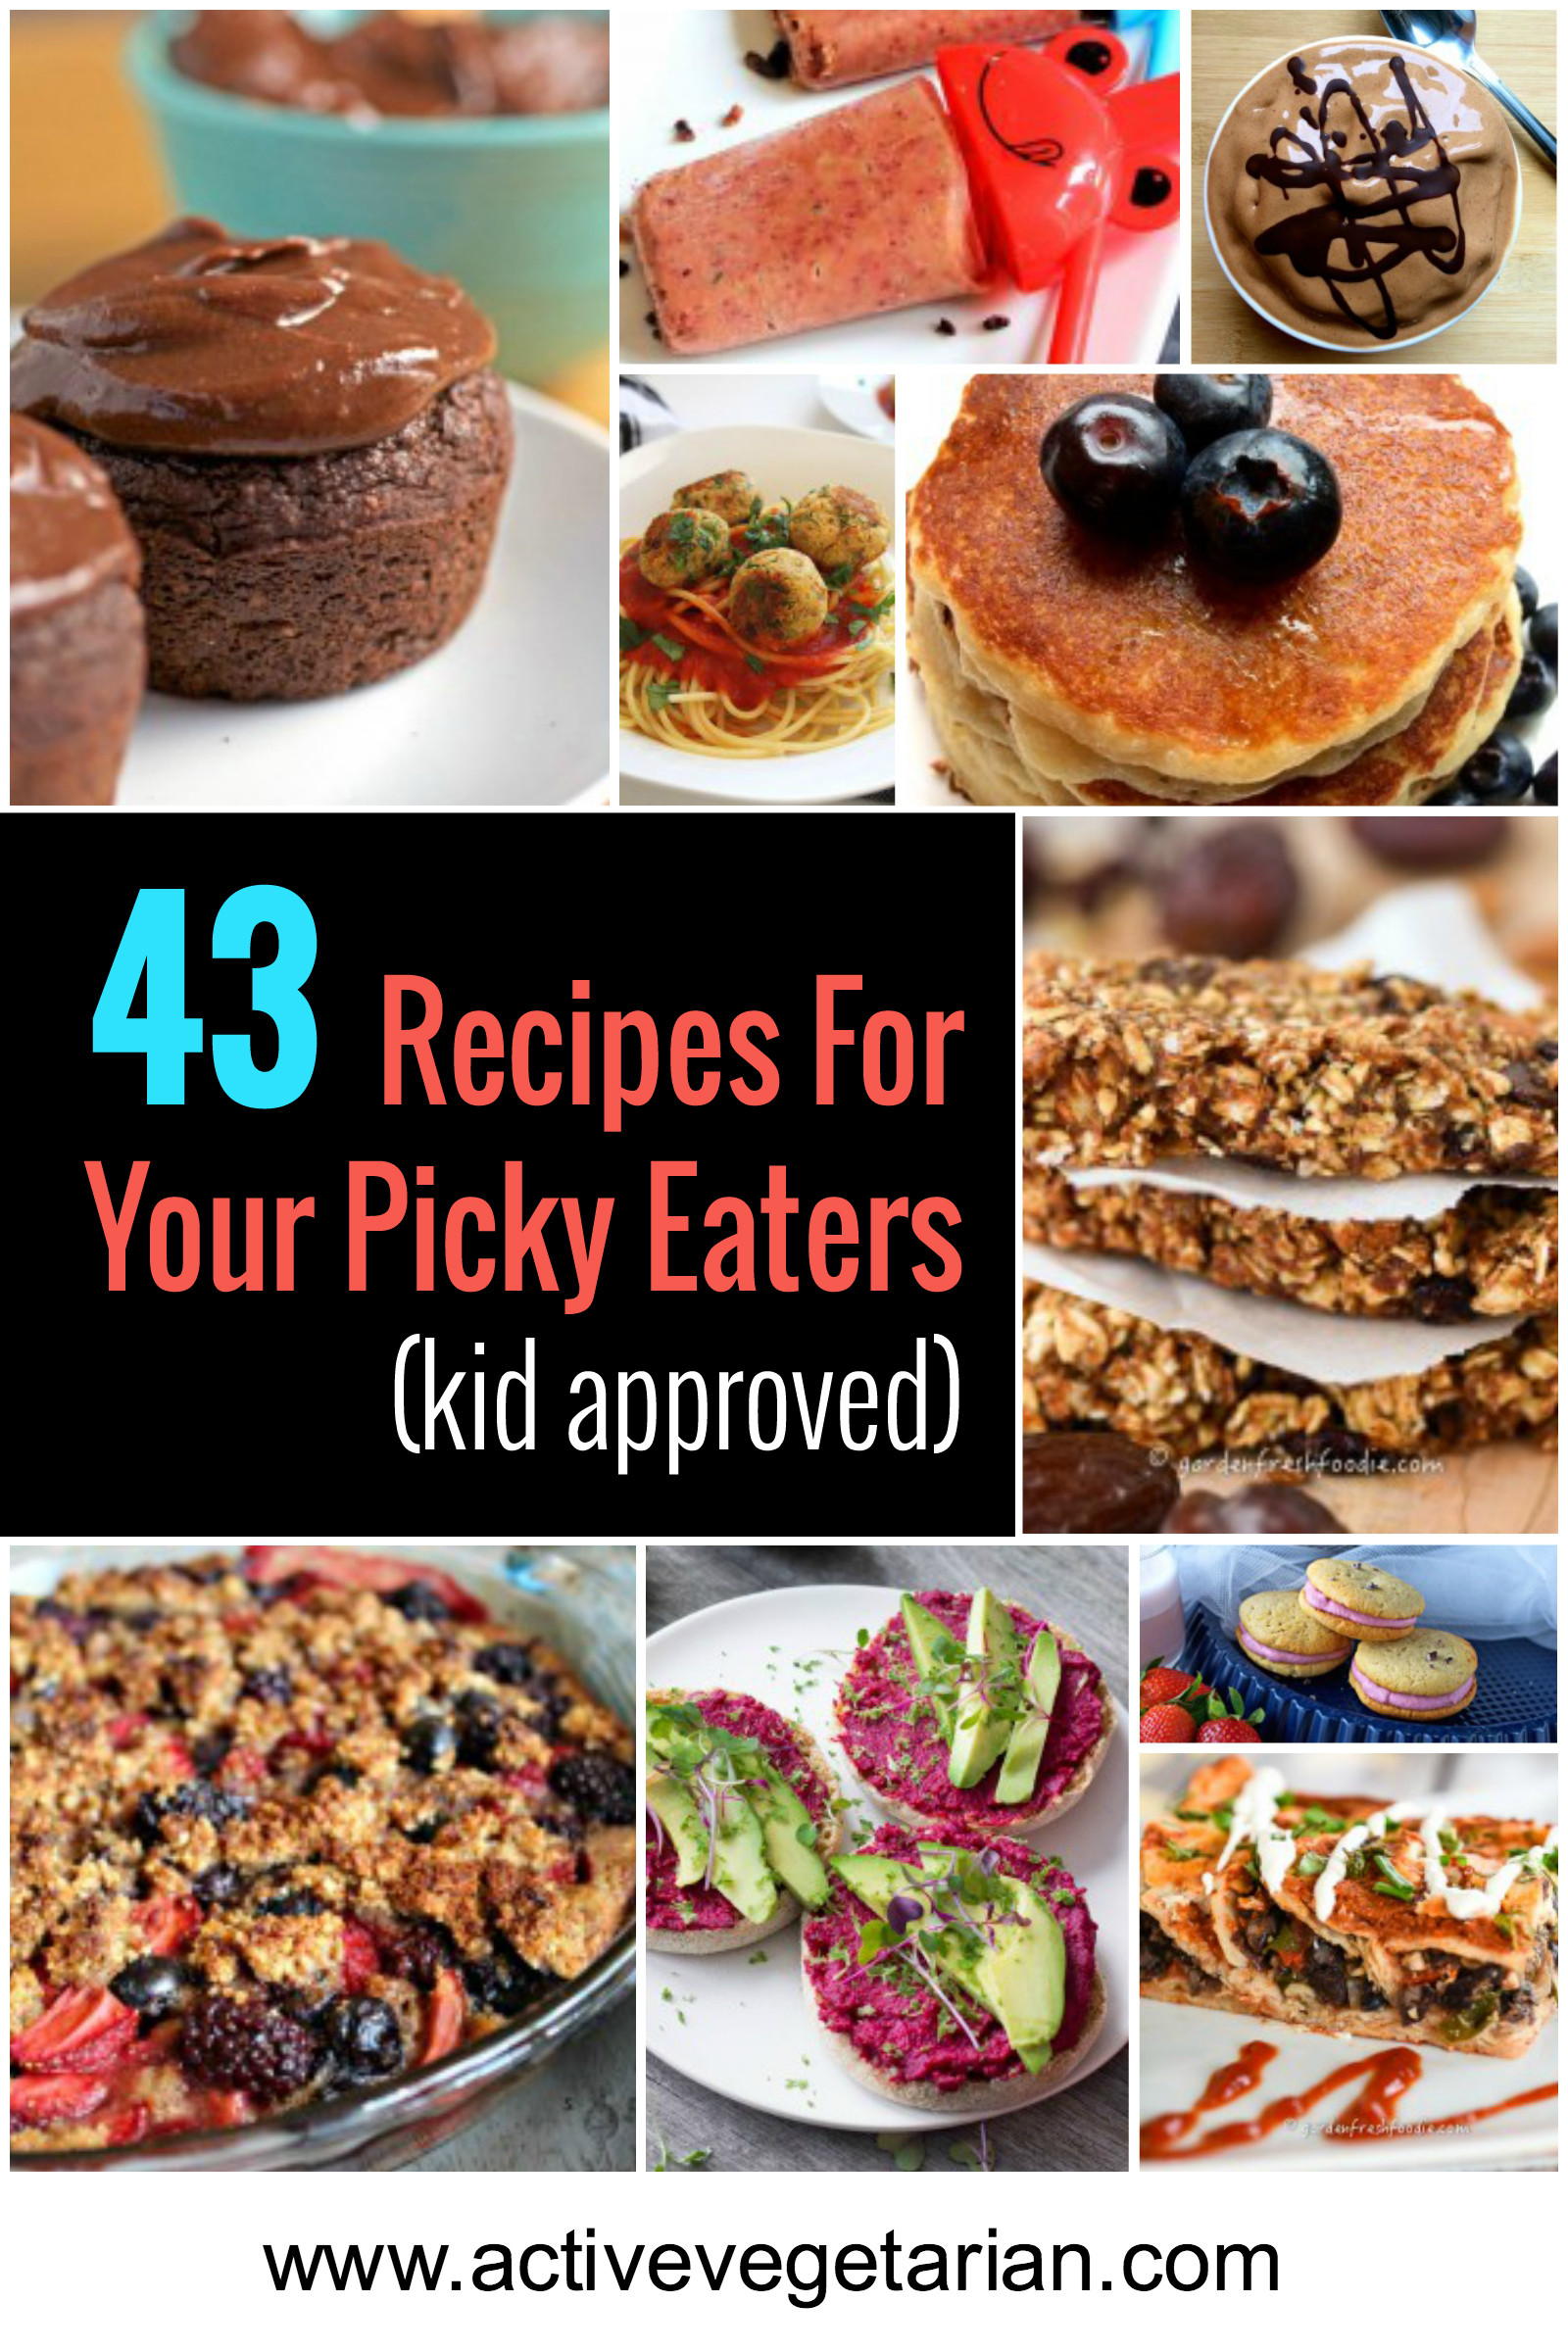 Recipes For Picky Kids
 Recipe Roundup 43 Recipes For Your Picky Eater’s kid